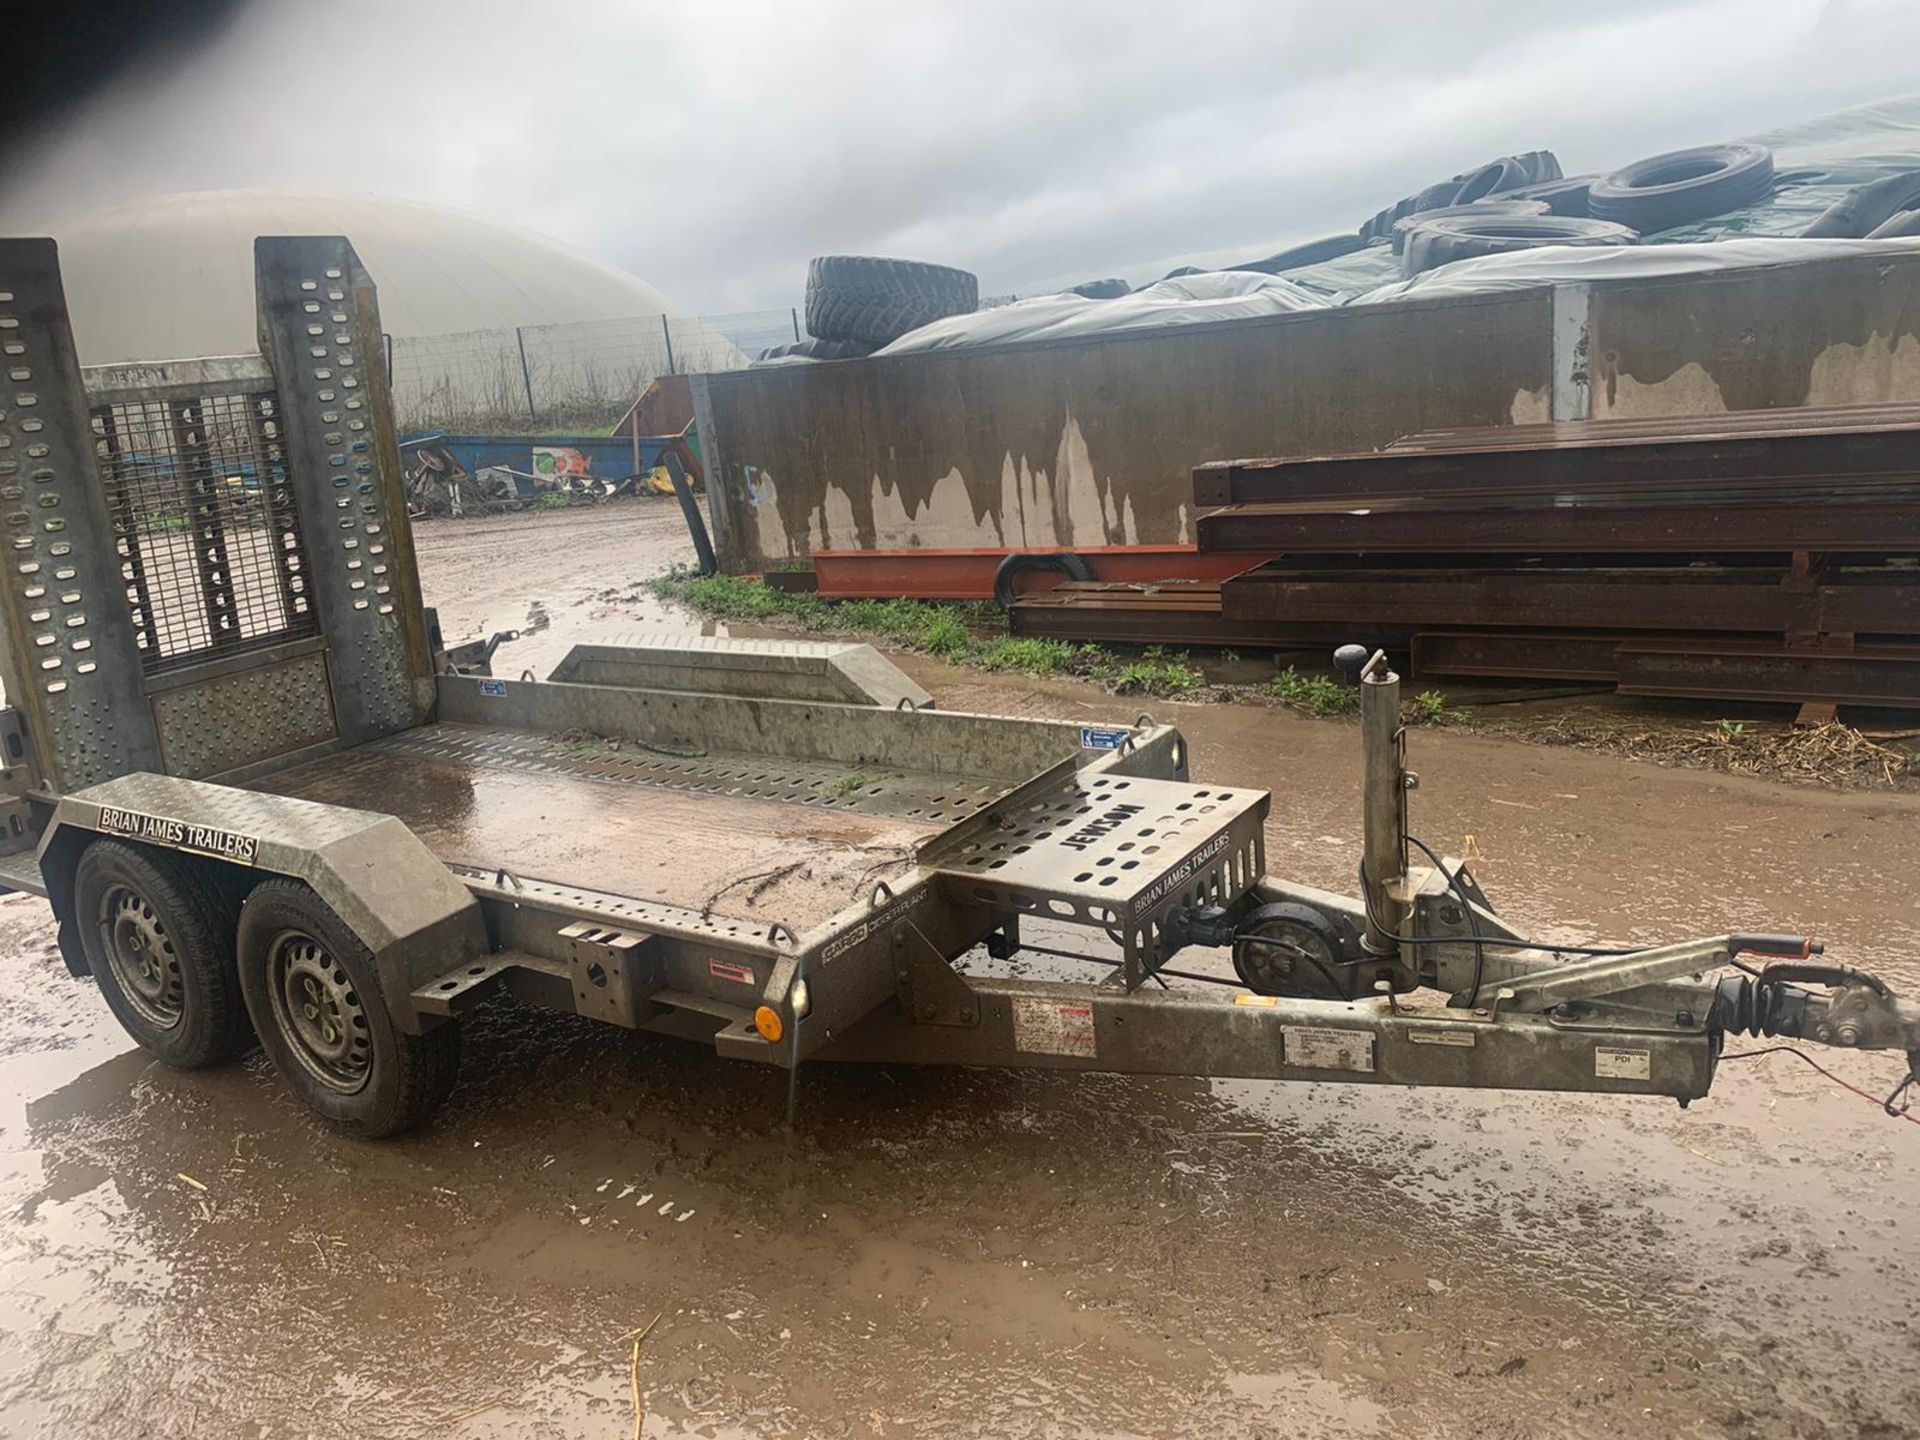 2015 BRIAN JAMES 2.7 TON PLANT TRAILER, 8 x4, IN VERY GOOD CONDITION *PLUS VAT*